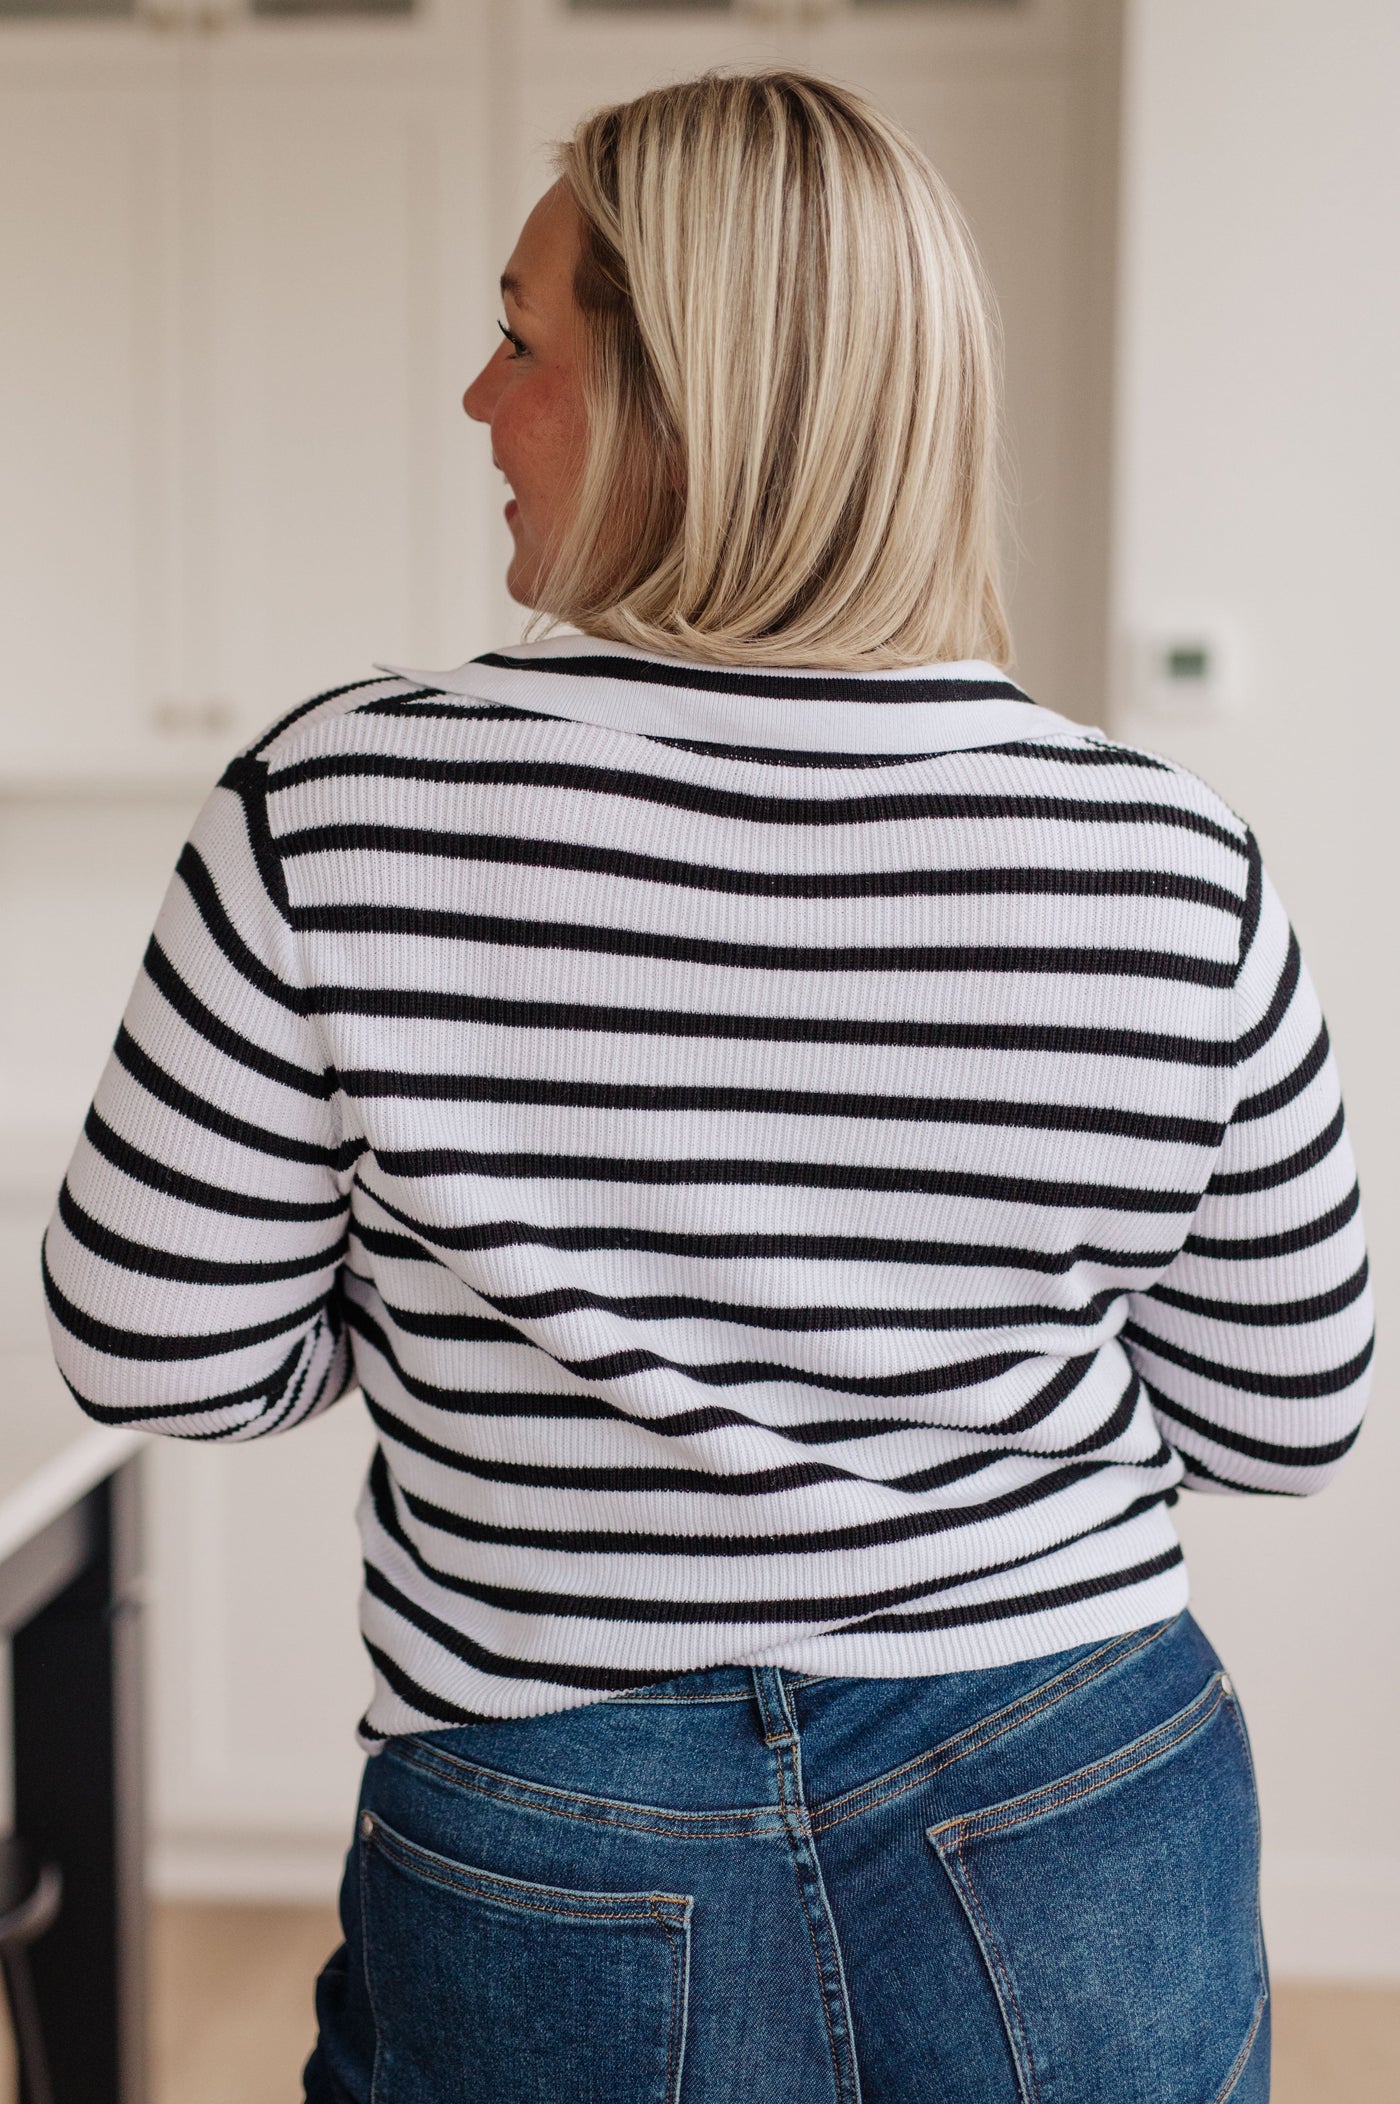 This lightweight sweater knit features a classic stripe print, with a collared v-neckline to complete the look